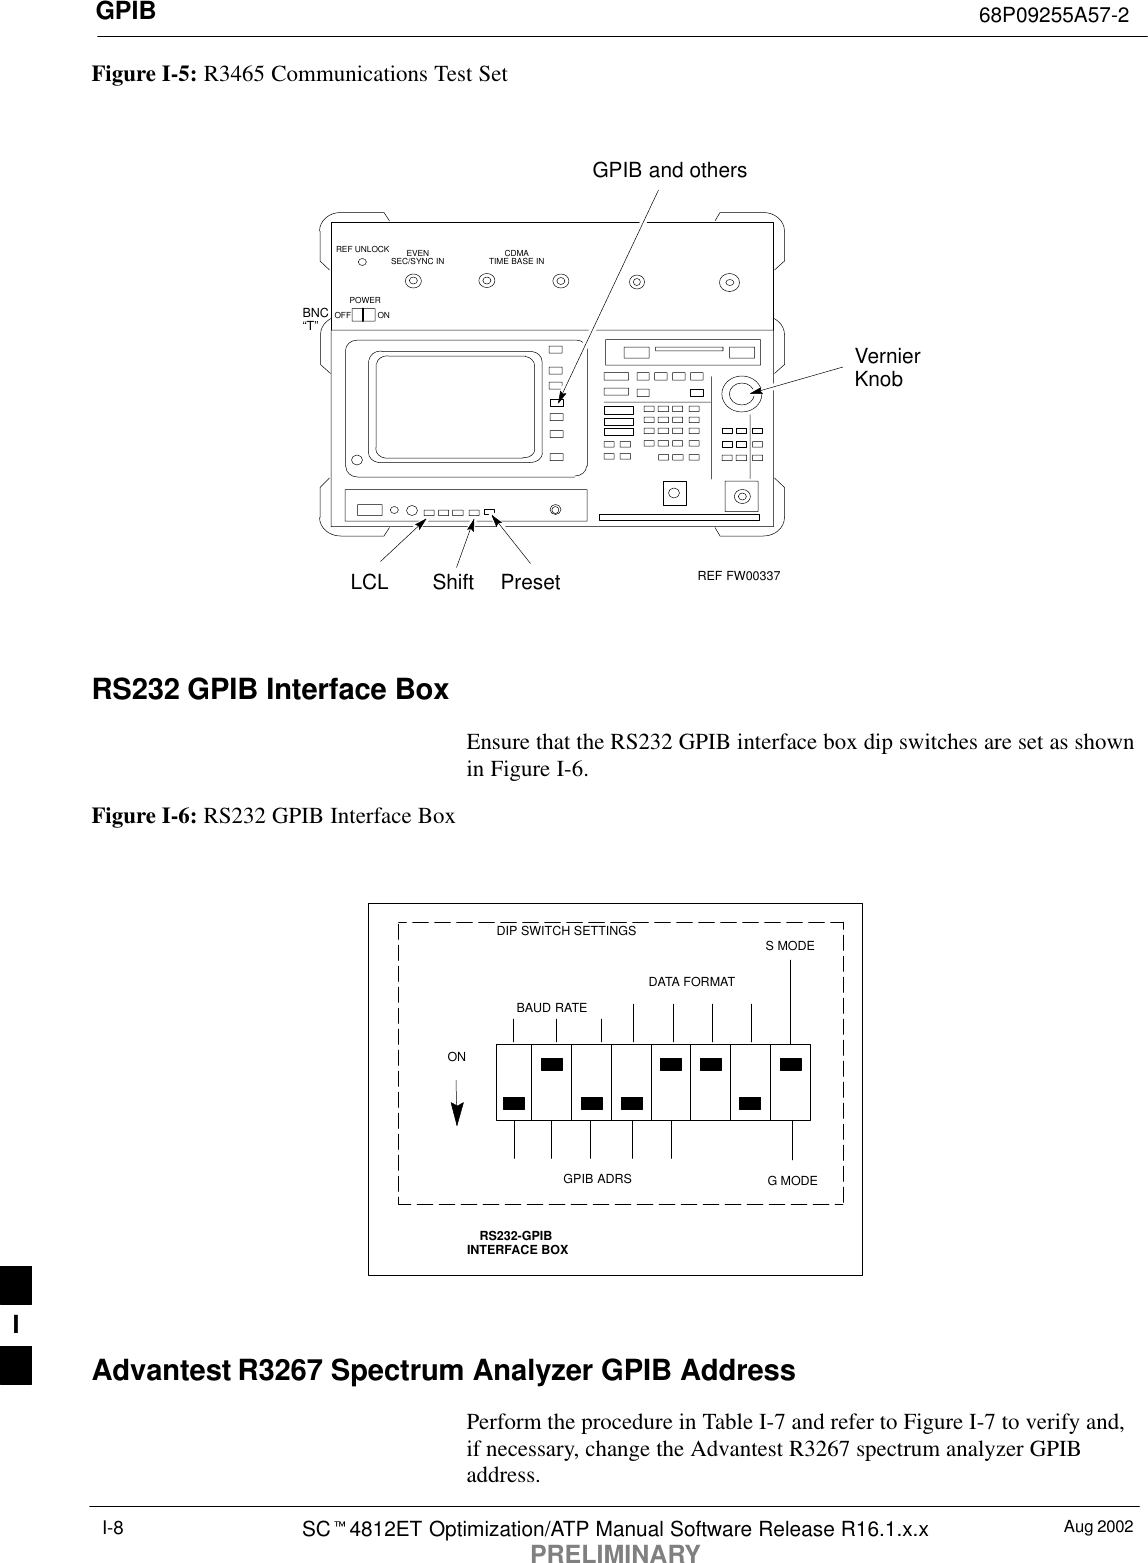 GPIB 68P09255A57-2Aug 2002SCt4812ET Optimization/ATP Manual Software Release R16.1.x.xPRELIMINARYI-8Figure I-5: R3465 Communications Test SetBNC“T”REF UNLOCK EVENSEC/SYNC IN CDMATIME BASE INPOWEROFF ONREF FW00337LCL Shift PresetGPIB and othersVernierKnobRS232 GPIB Interface BoxEnsure that the RS232 GPIB interface box dip switches are set as shownin Figure I-6.Figure I-6: RS232 GPIB Interface BoxRS232-GPIBINTERFACE BOXS MODEDATA FORMATBAUD RATEGPIB ADRSONDIP SWITCH SETTINGSG MODEAdvantest R3267 Spectrum Analyzer GPIB AddressPerform the procedure in Table I-7 and refer to Figure I-7 to verify and,if necessary, change the Advantest R3267 spectrum analyzer GPIBaddress.I